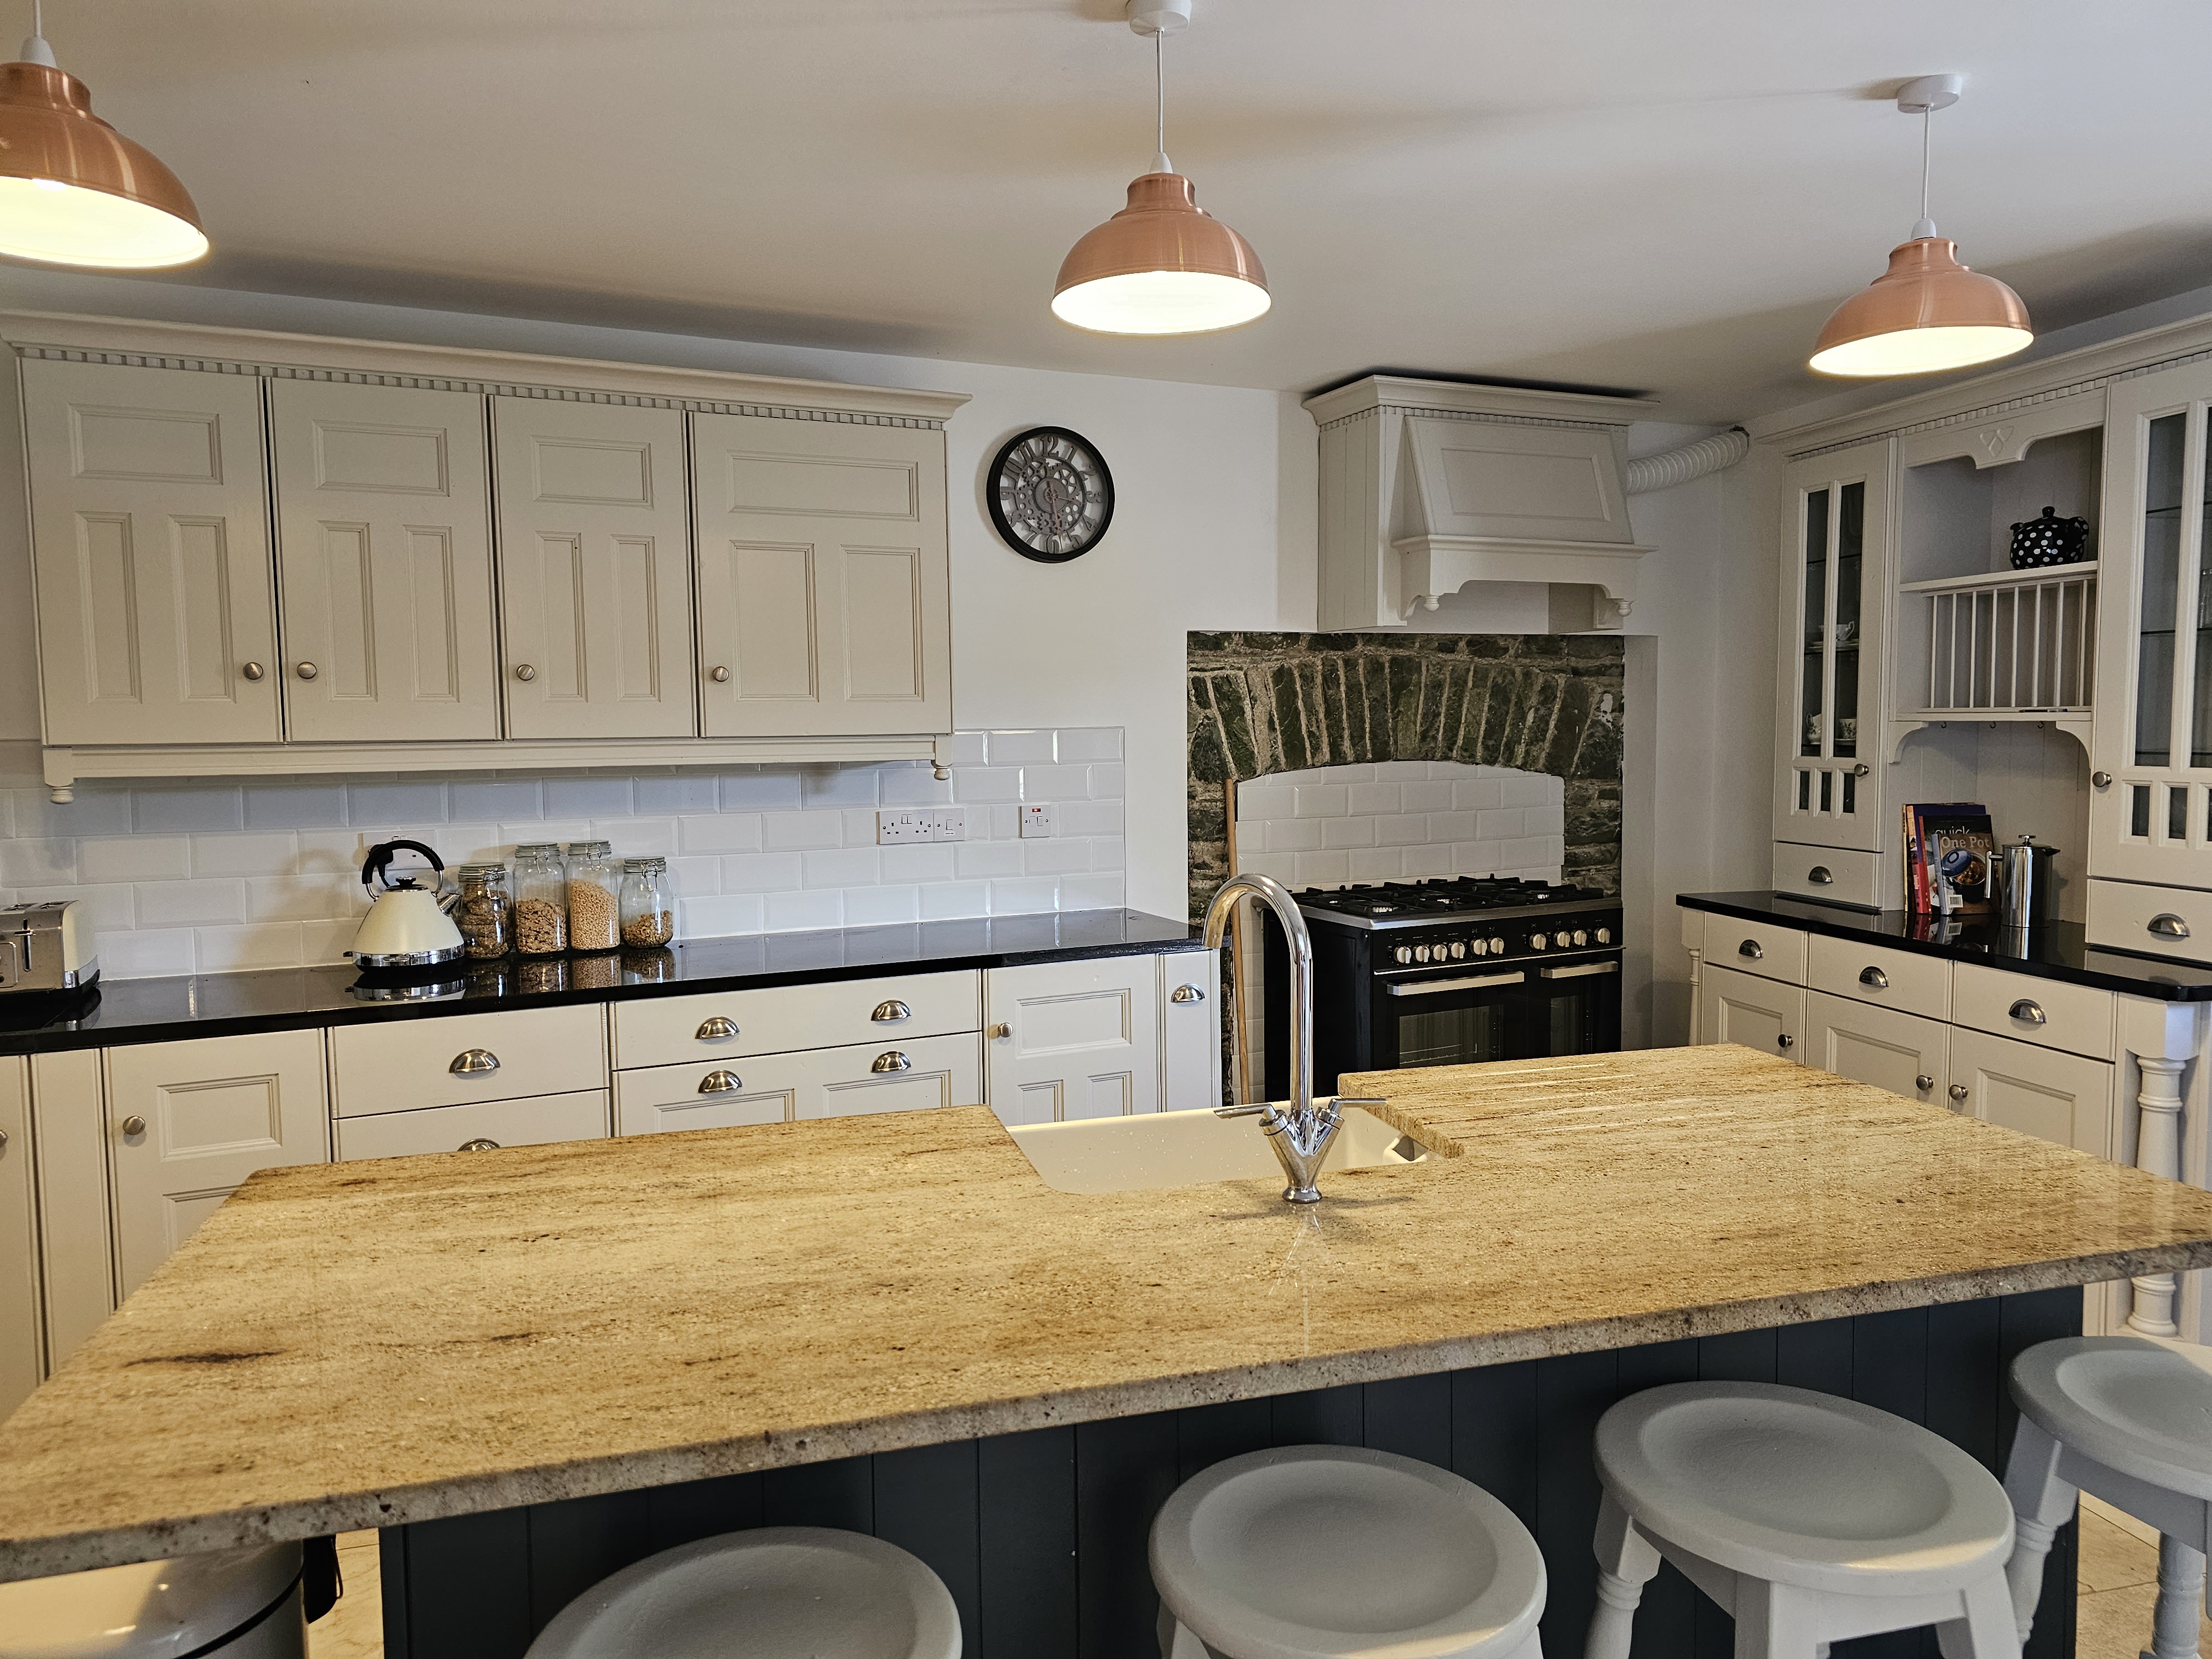 Gardener's Lodge -well equipped kitchen, large island and stools